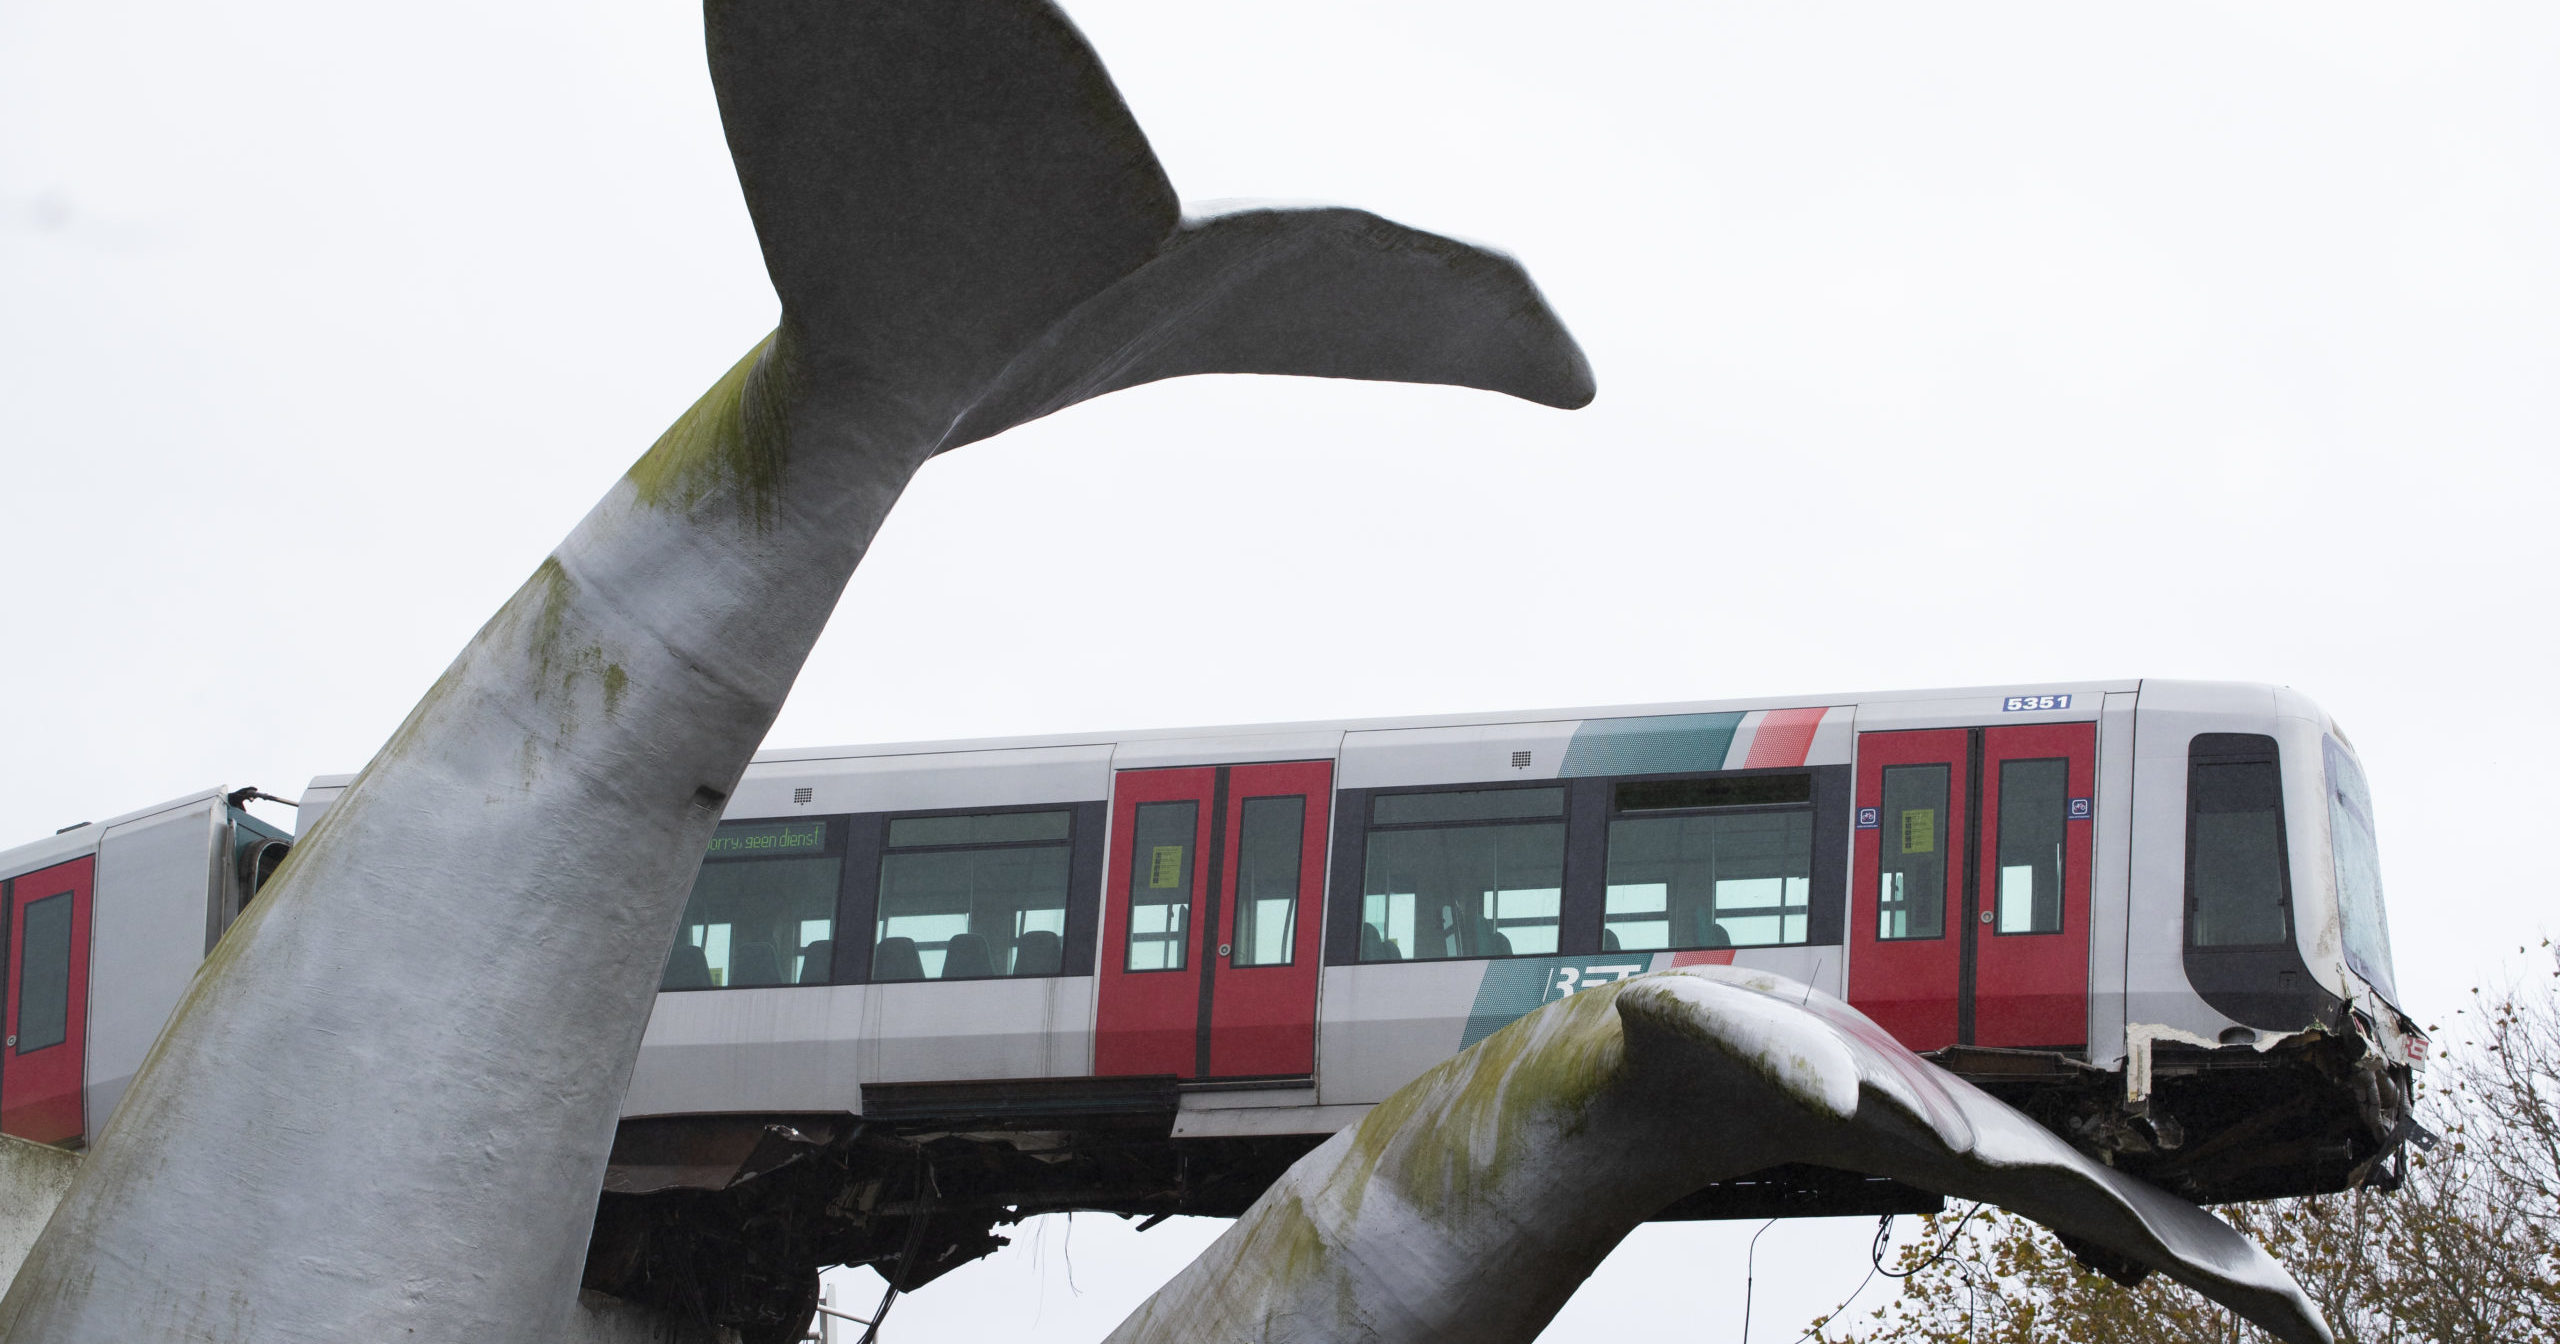 The whale's tail of a sculpture caught the front carriage of a metro train as it rammed through the end of an elevated section of rails with the driver escaping injuries in Spijkenisse, near Rotterdam, Netherlands, on Monday.